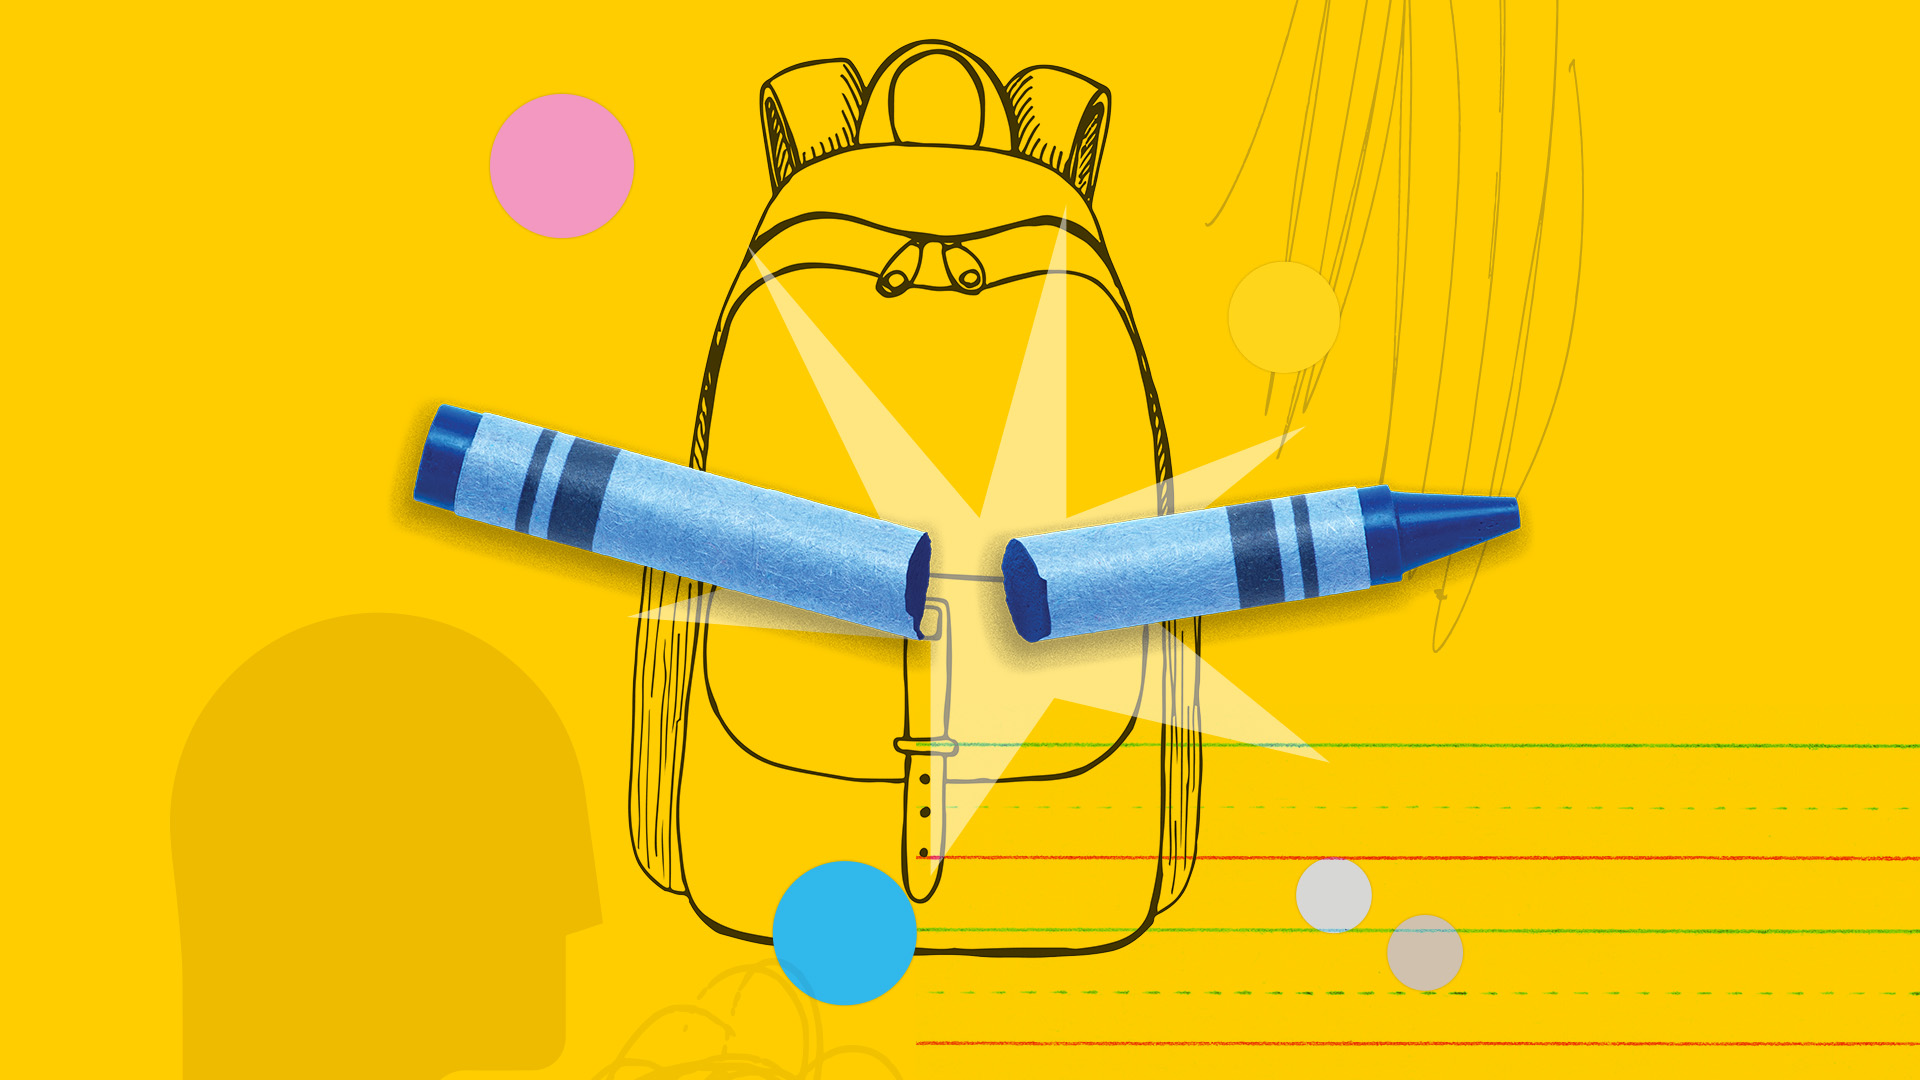 an illustration showing a backpack, a broken crayon, and lined paper